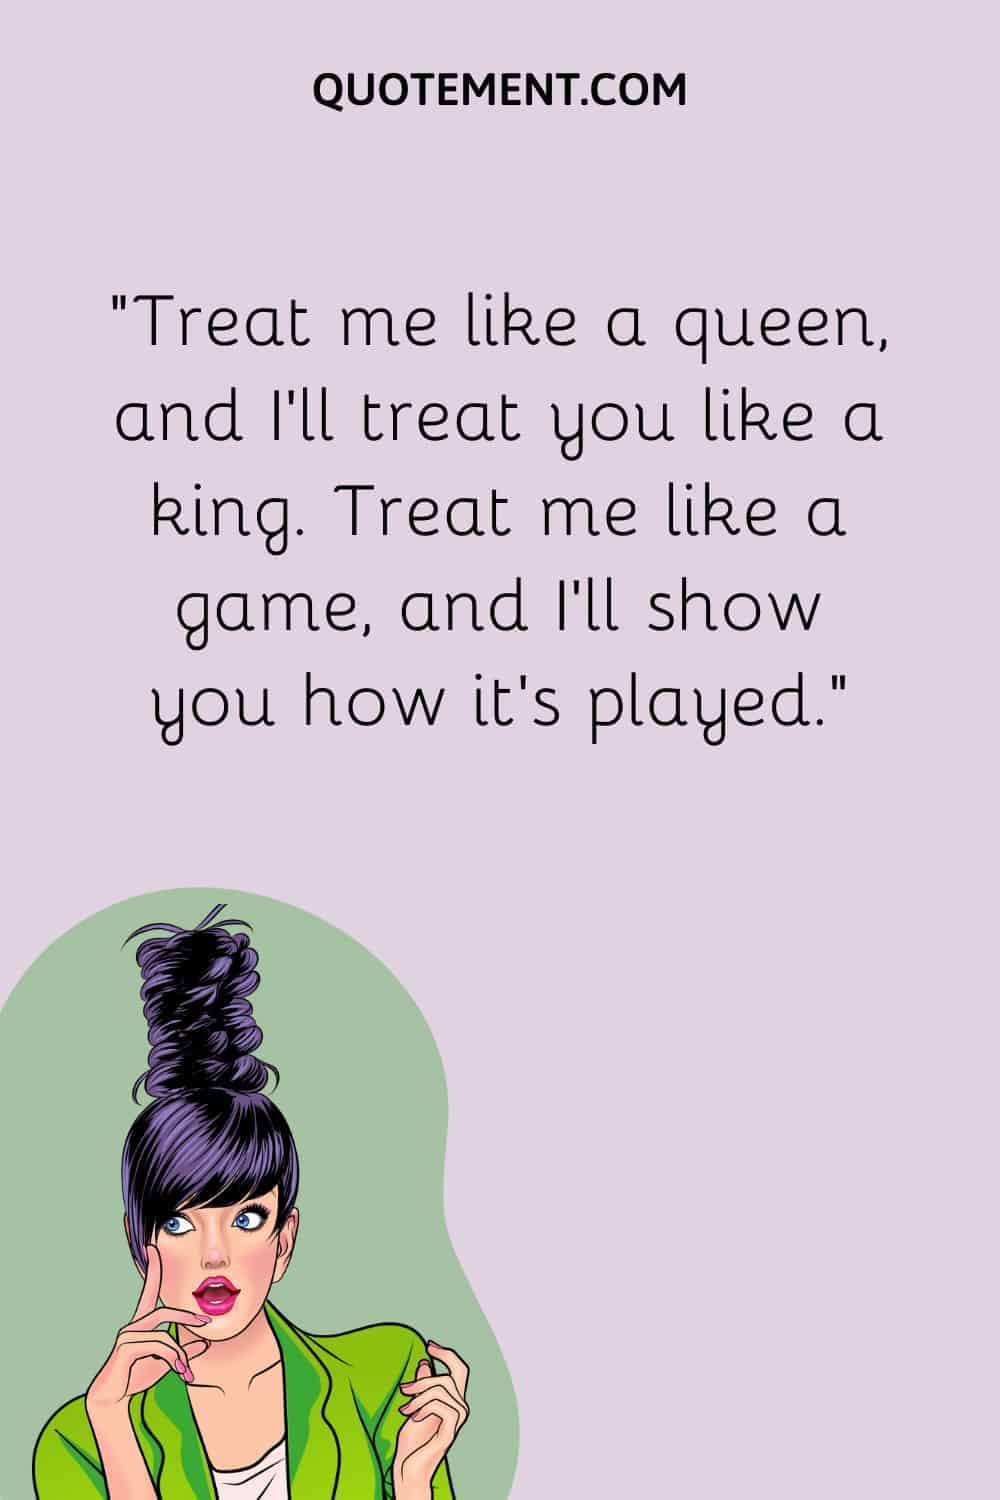 Treat me like a queen